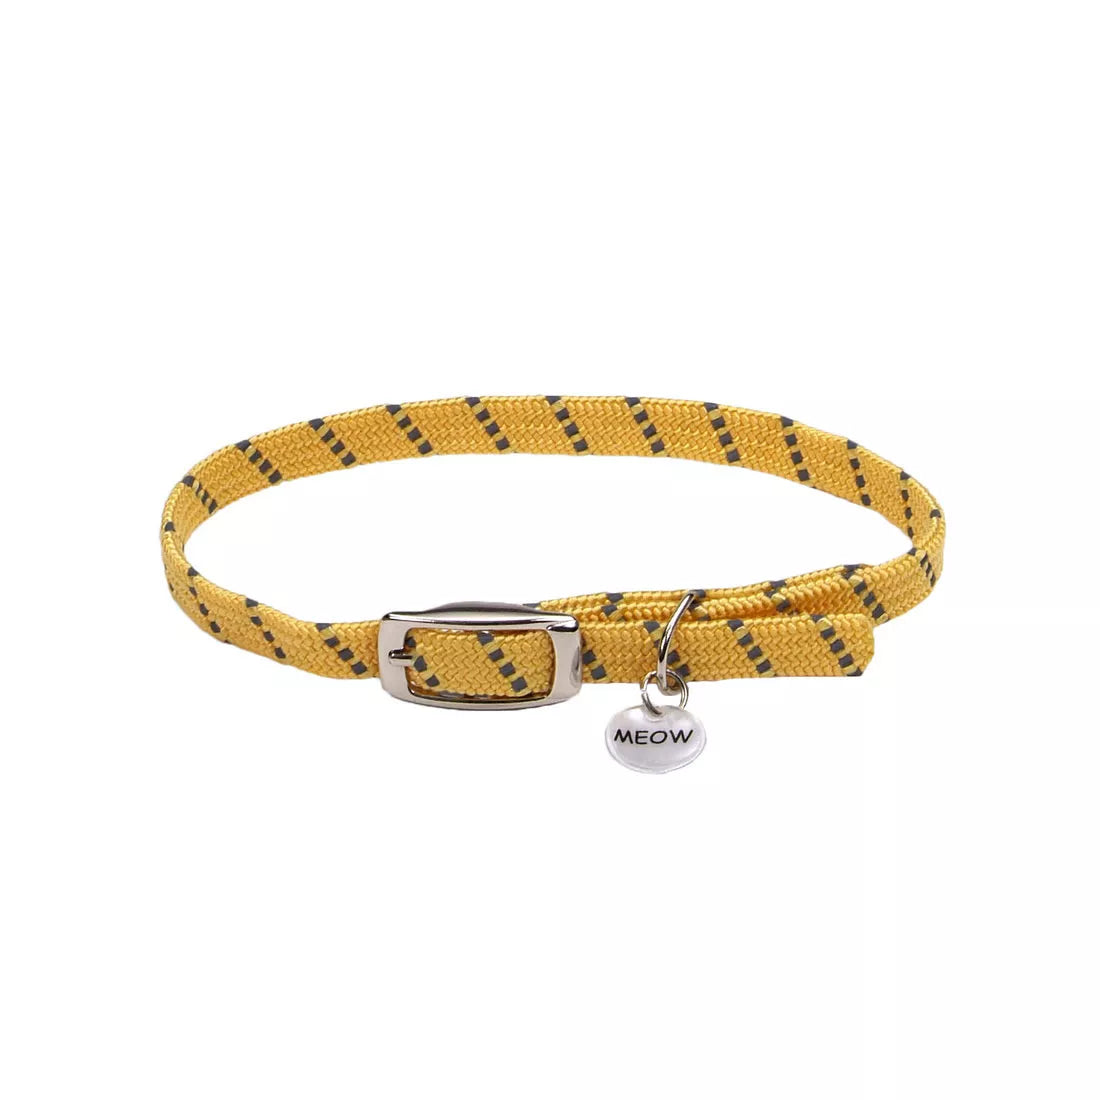 Coastal Pet Products ElastaCat Reflective Safety Stretch Collar With Reflective Charm For Cats